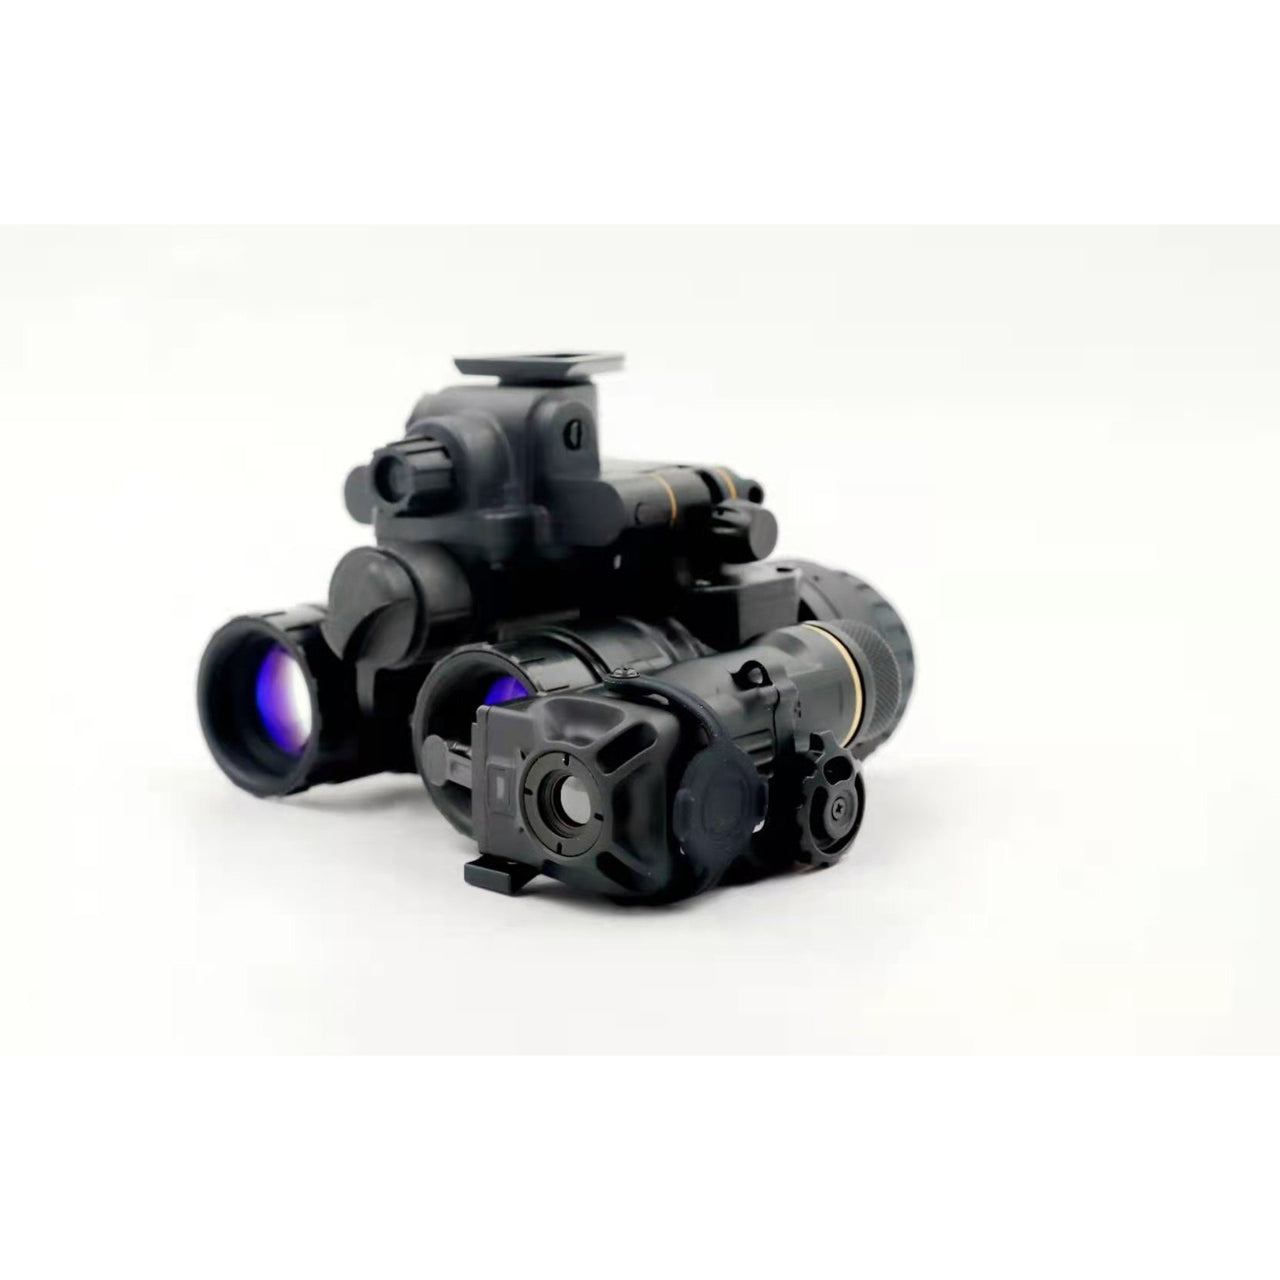 Jerry C Series Thermal Imager CE2